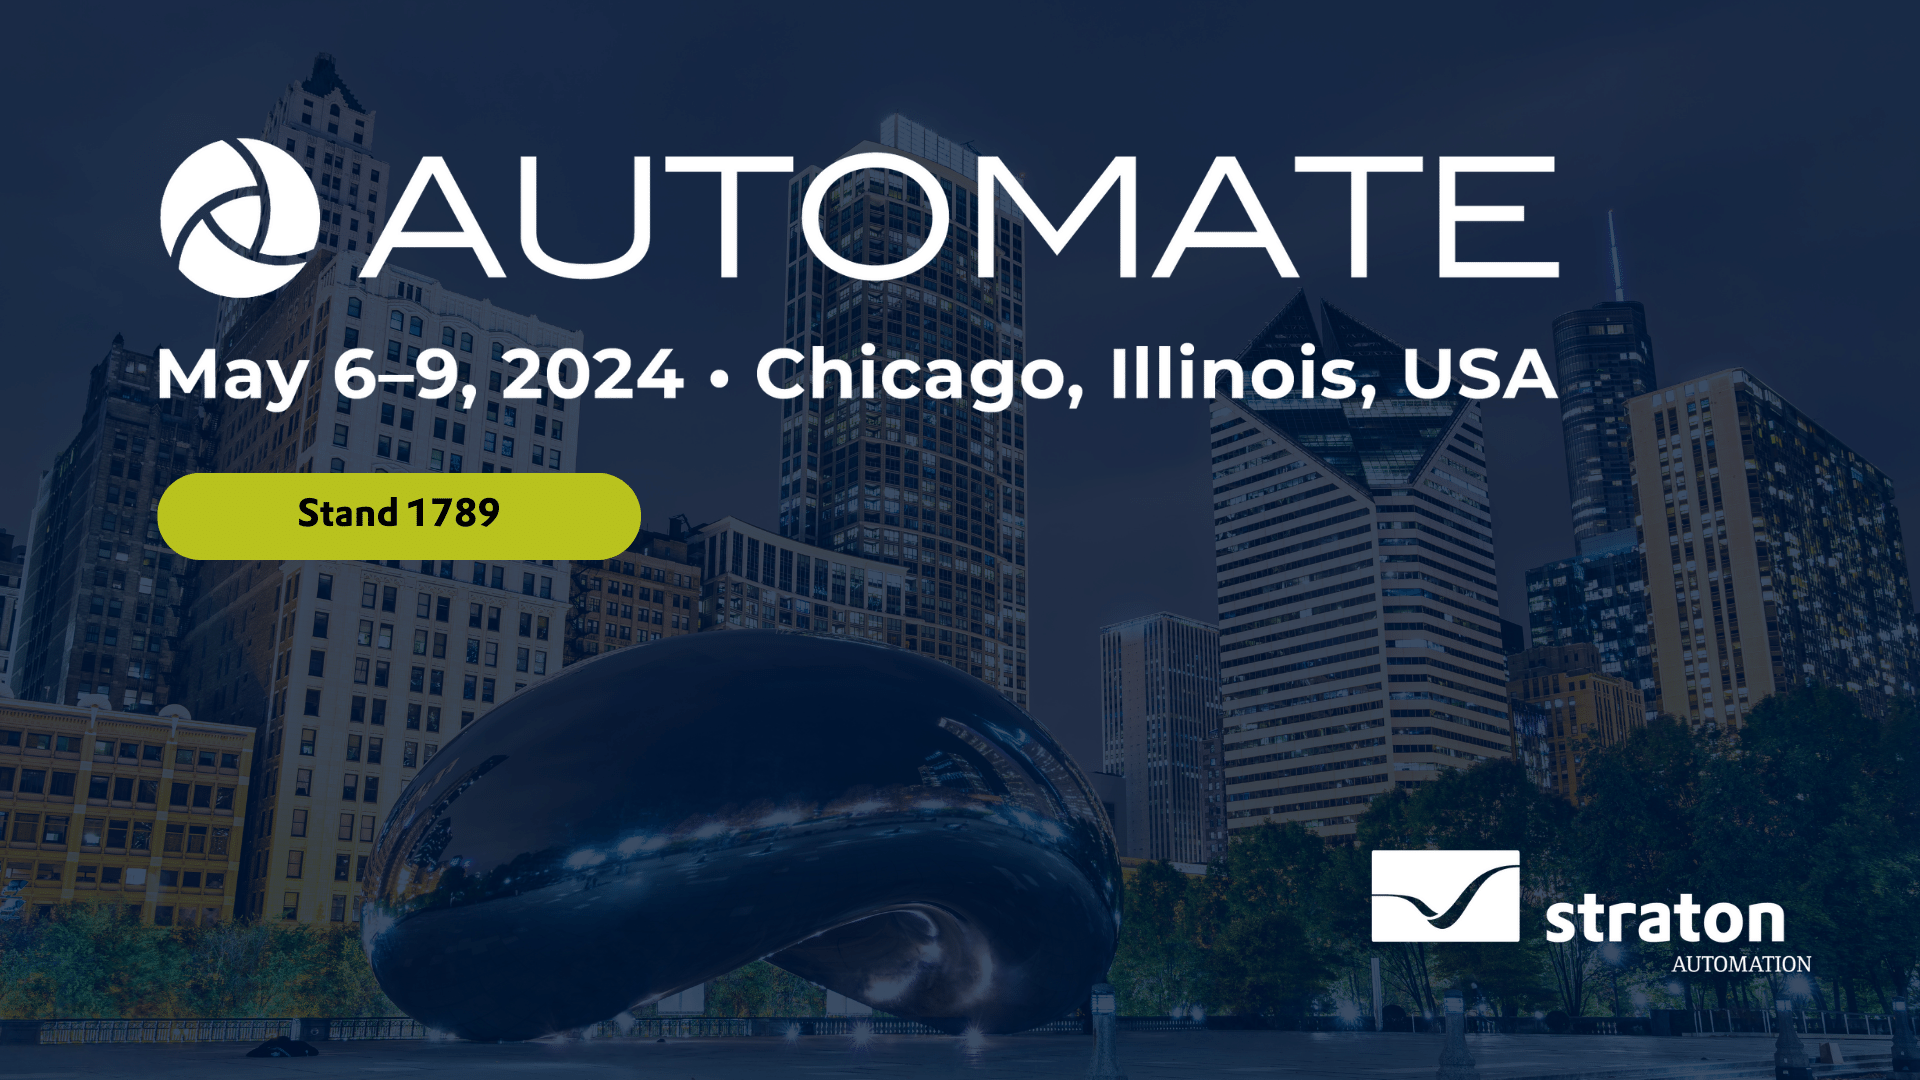 STRATON AUTOMATION - Automate Chicago